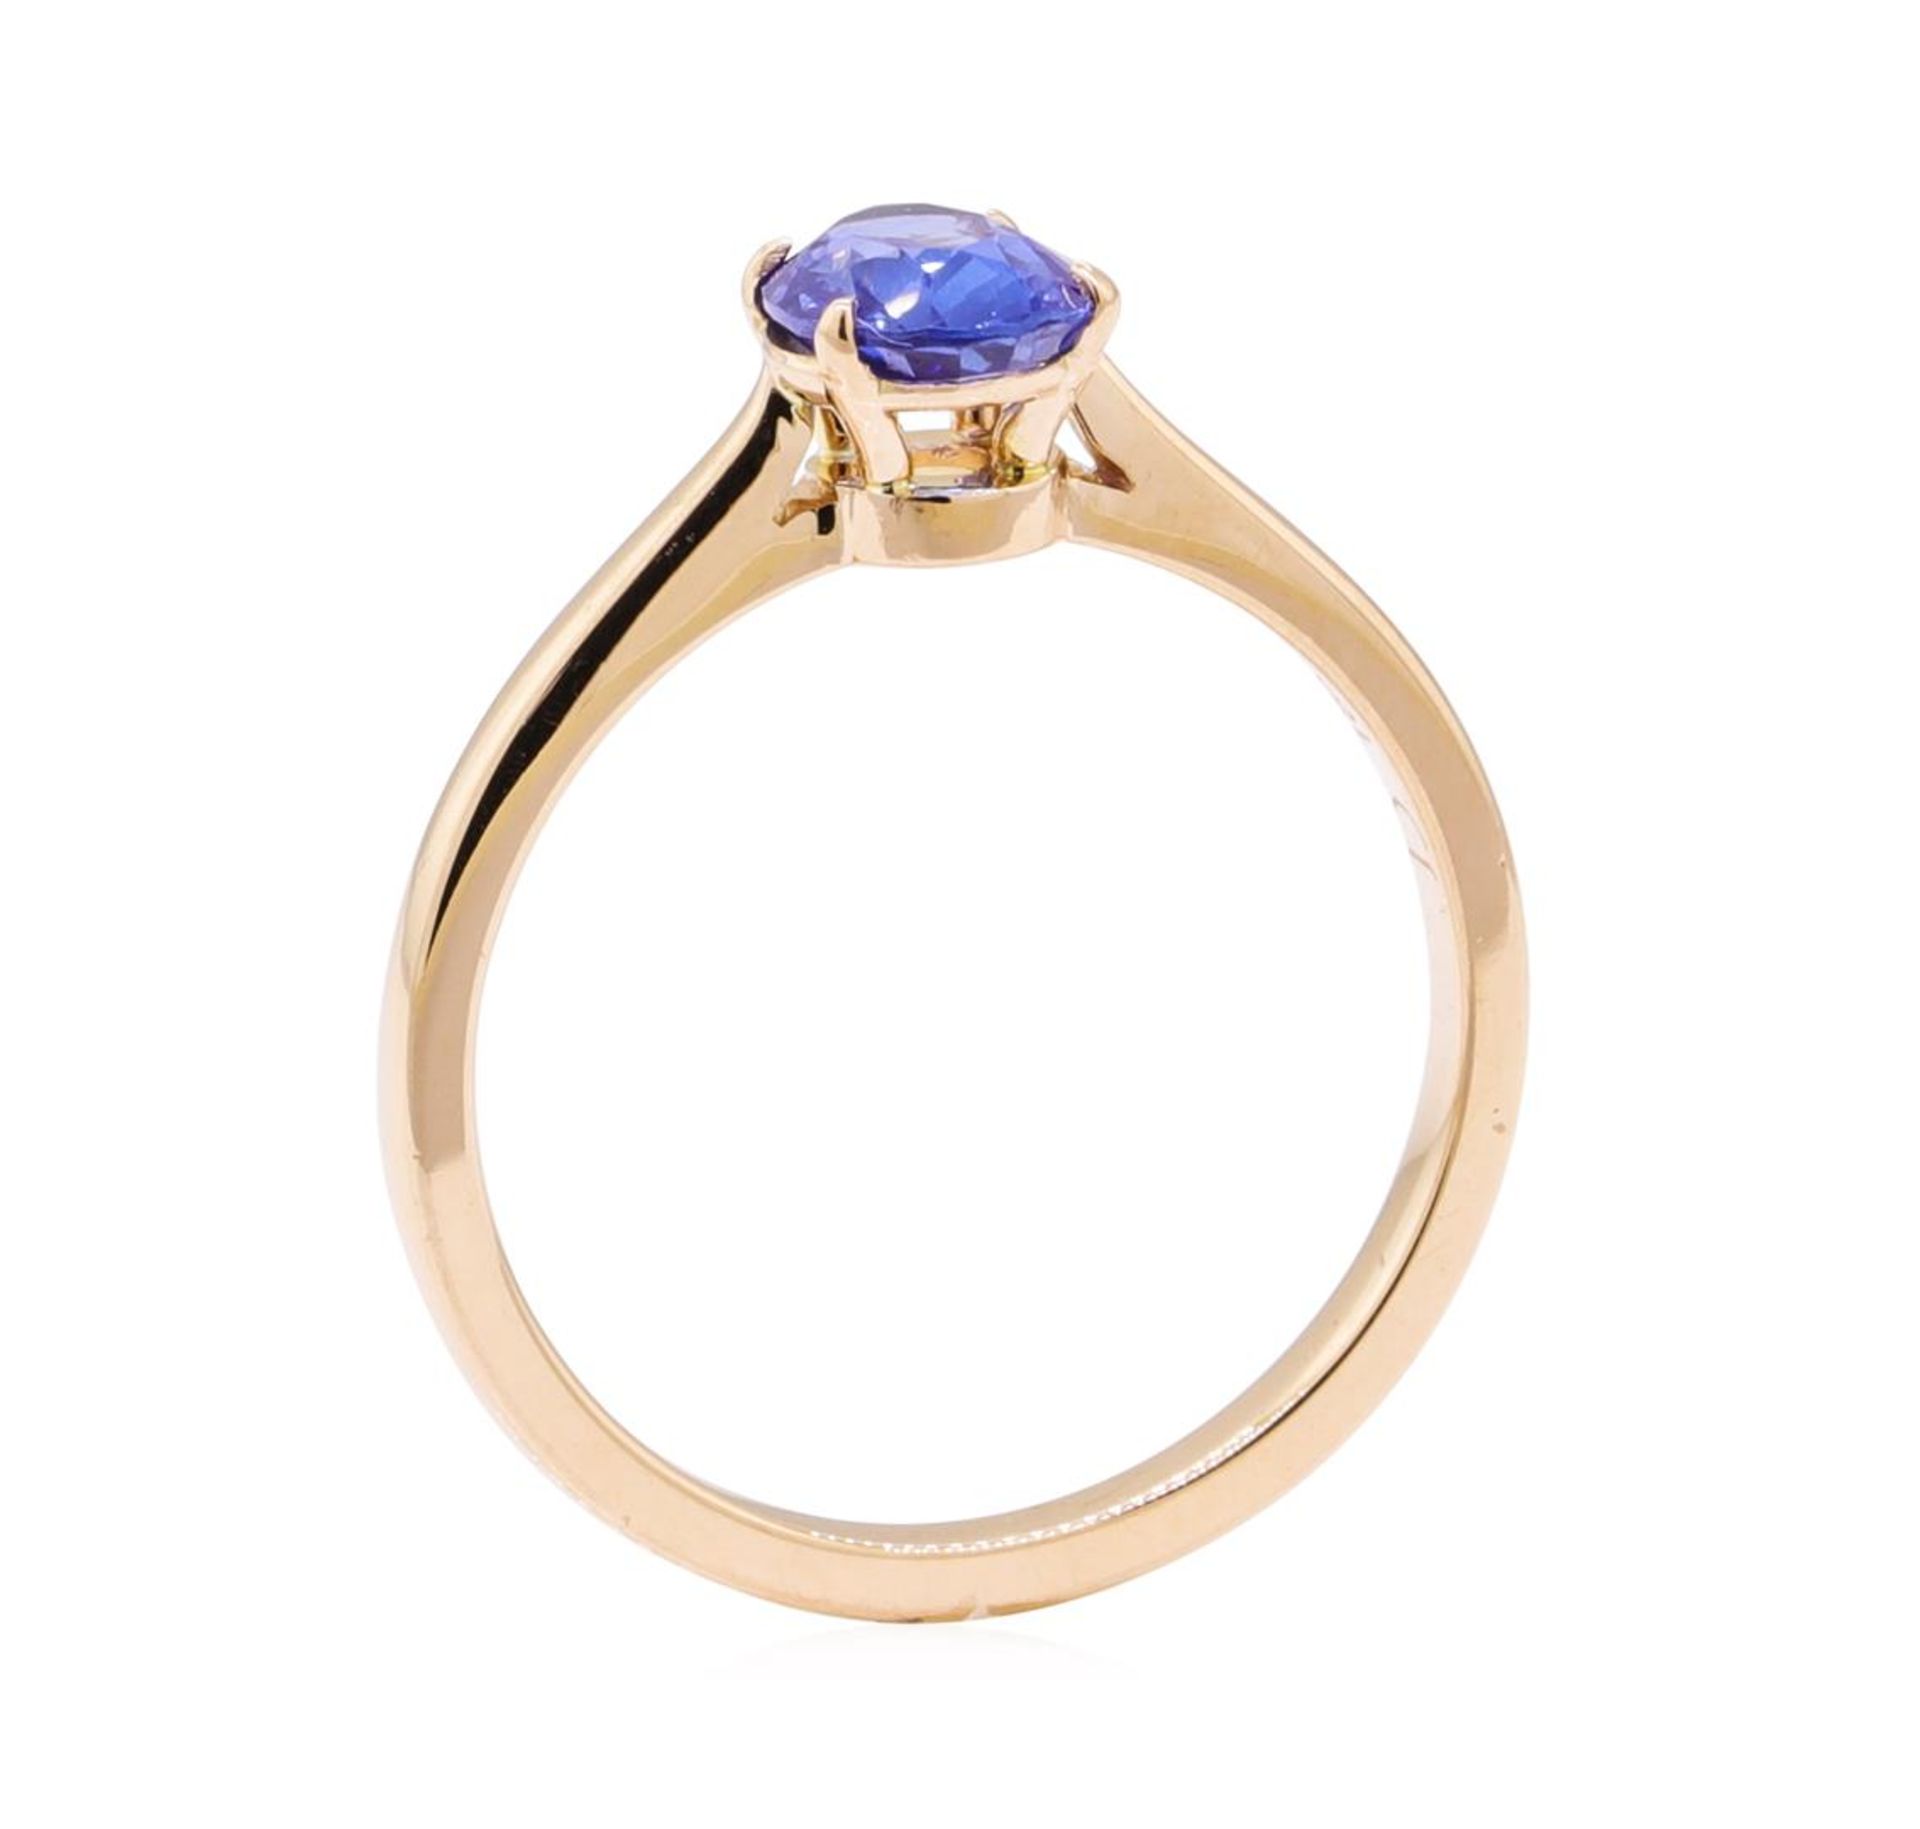 0.98 ctw Blue Sapphire Ring - 18KT Rose Gold - Image 4 of 4